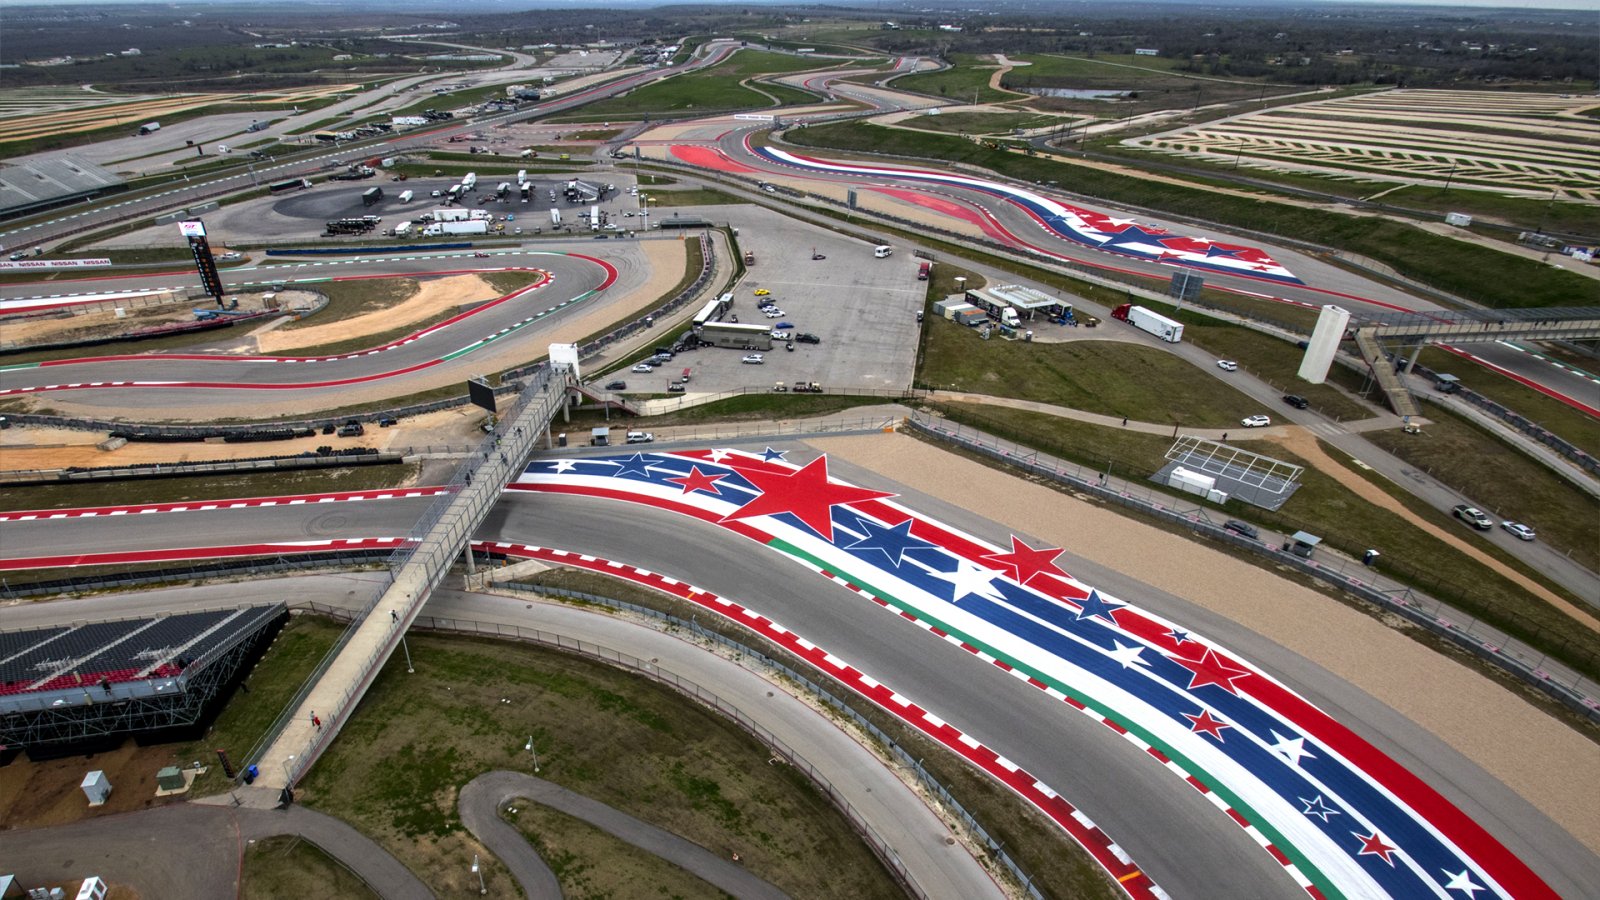 2020 Pirelli GT4 America Sprint Season Springs To Action At Circuit of the Americas with seventeen entries